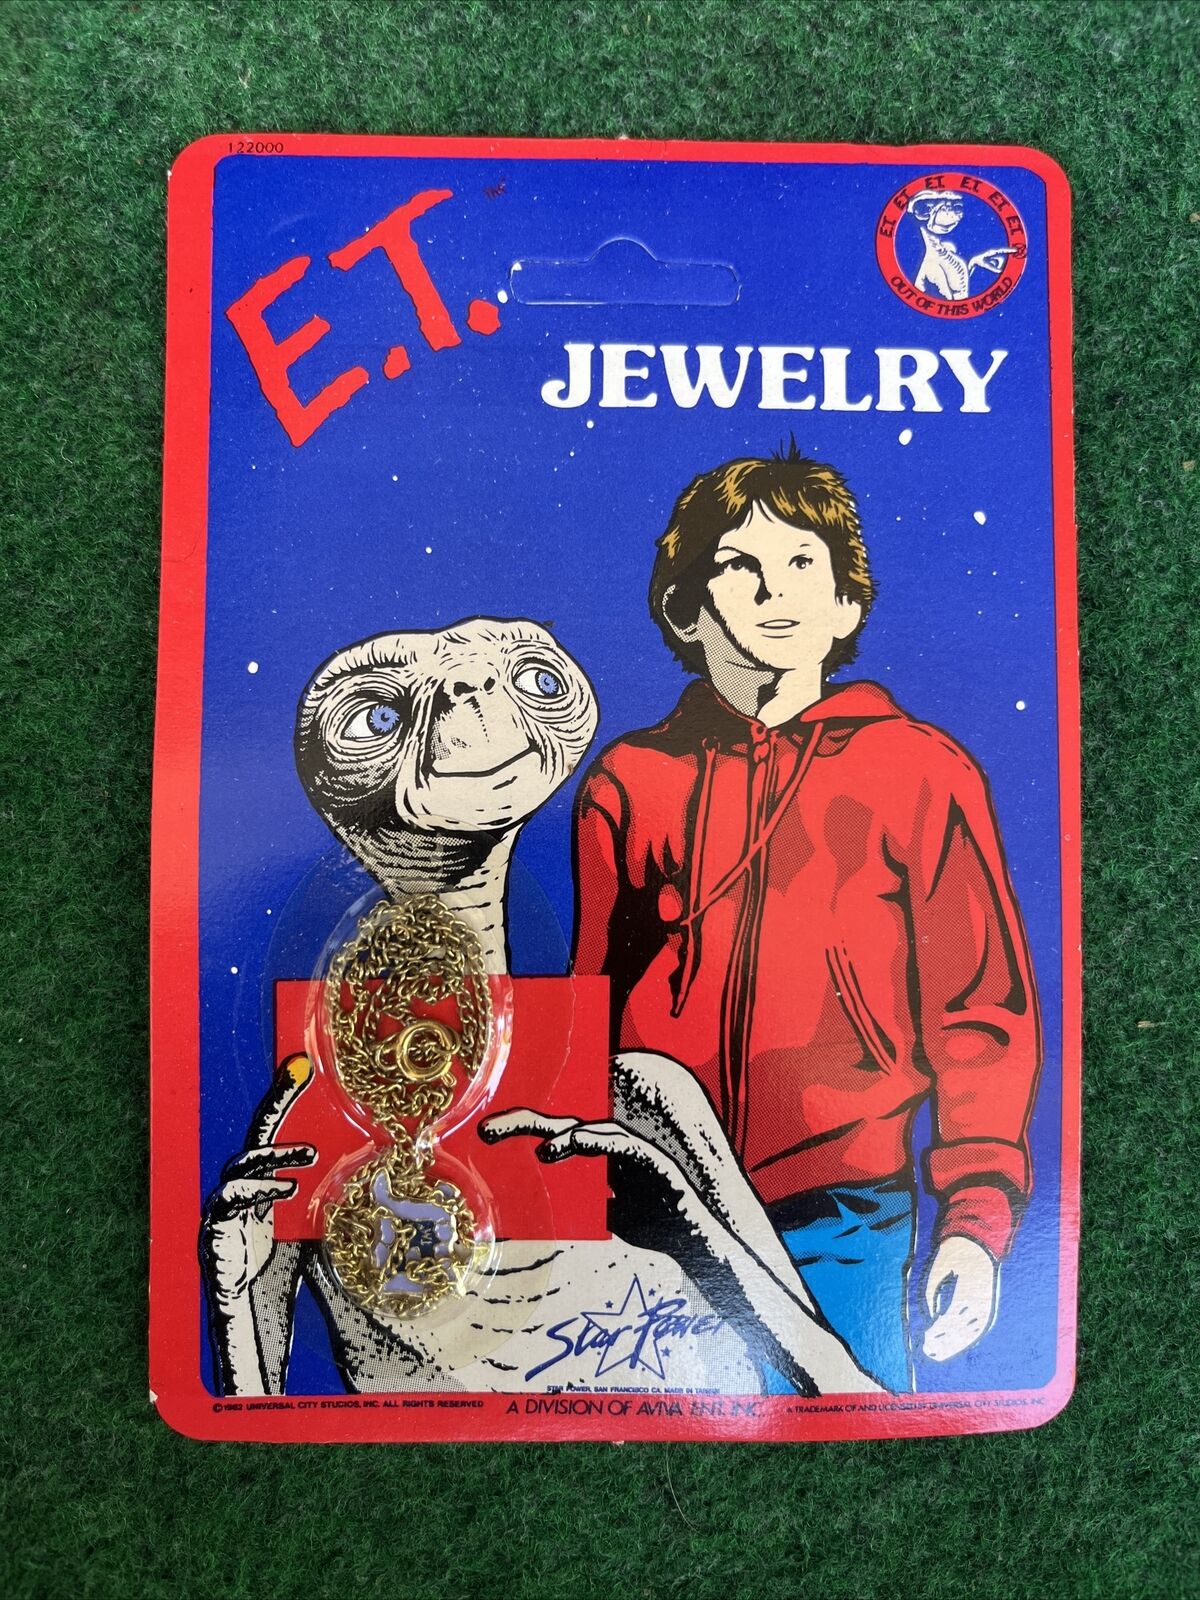 VINTAGE E.T. EXTRA TERRESTRIAL Carded Jewellery Necklace Set SEALED - E.T. 1982